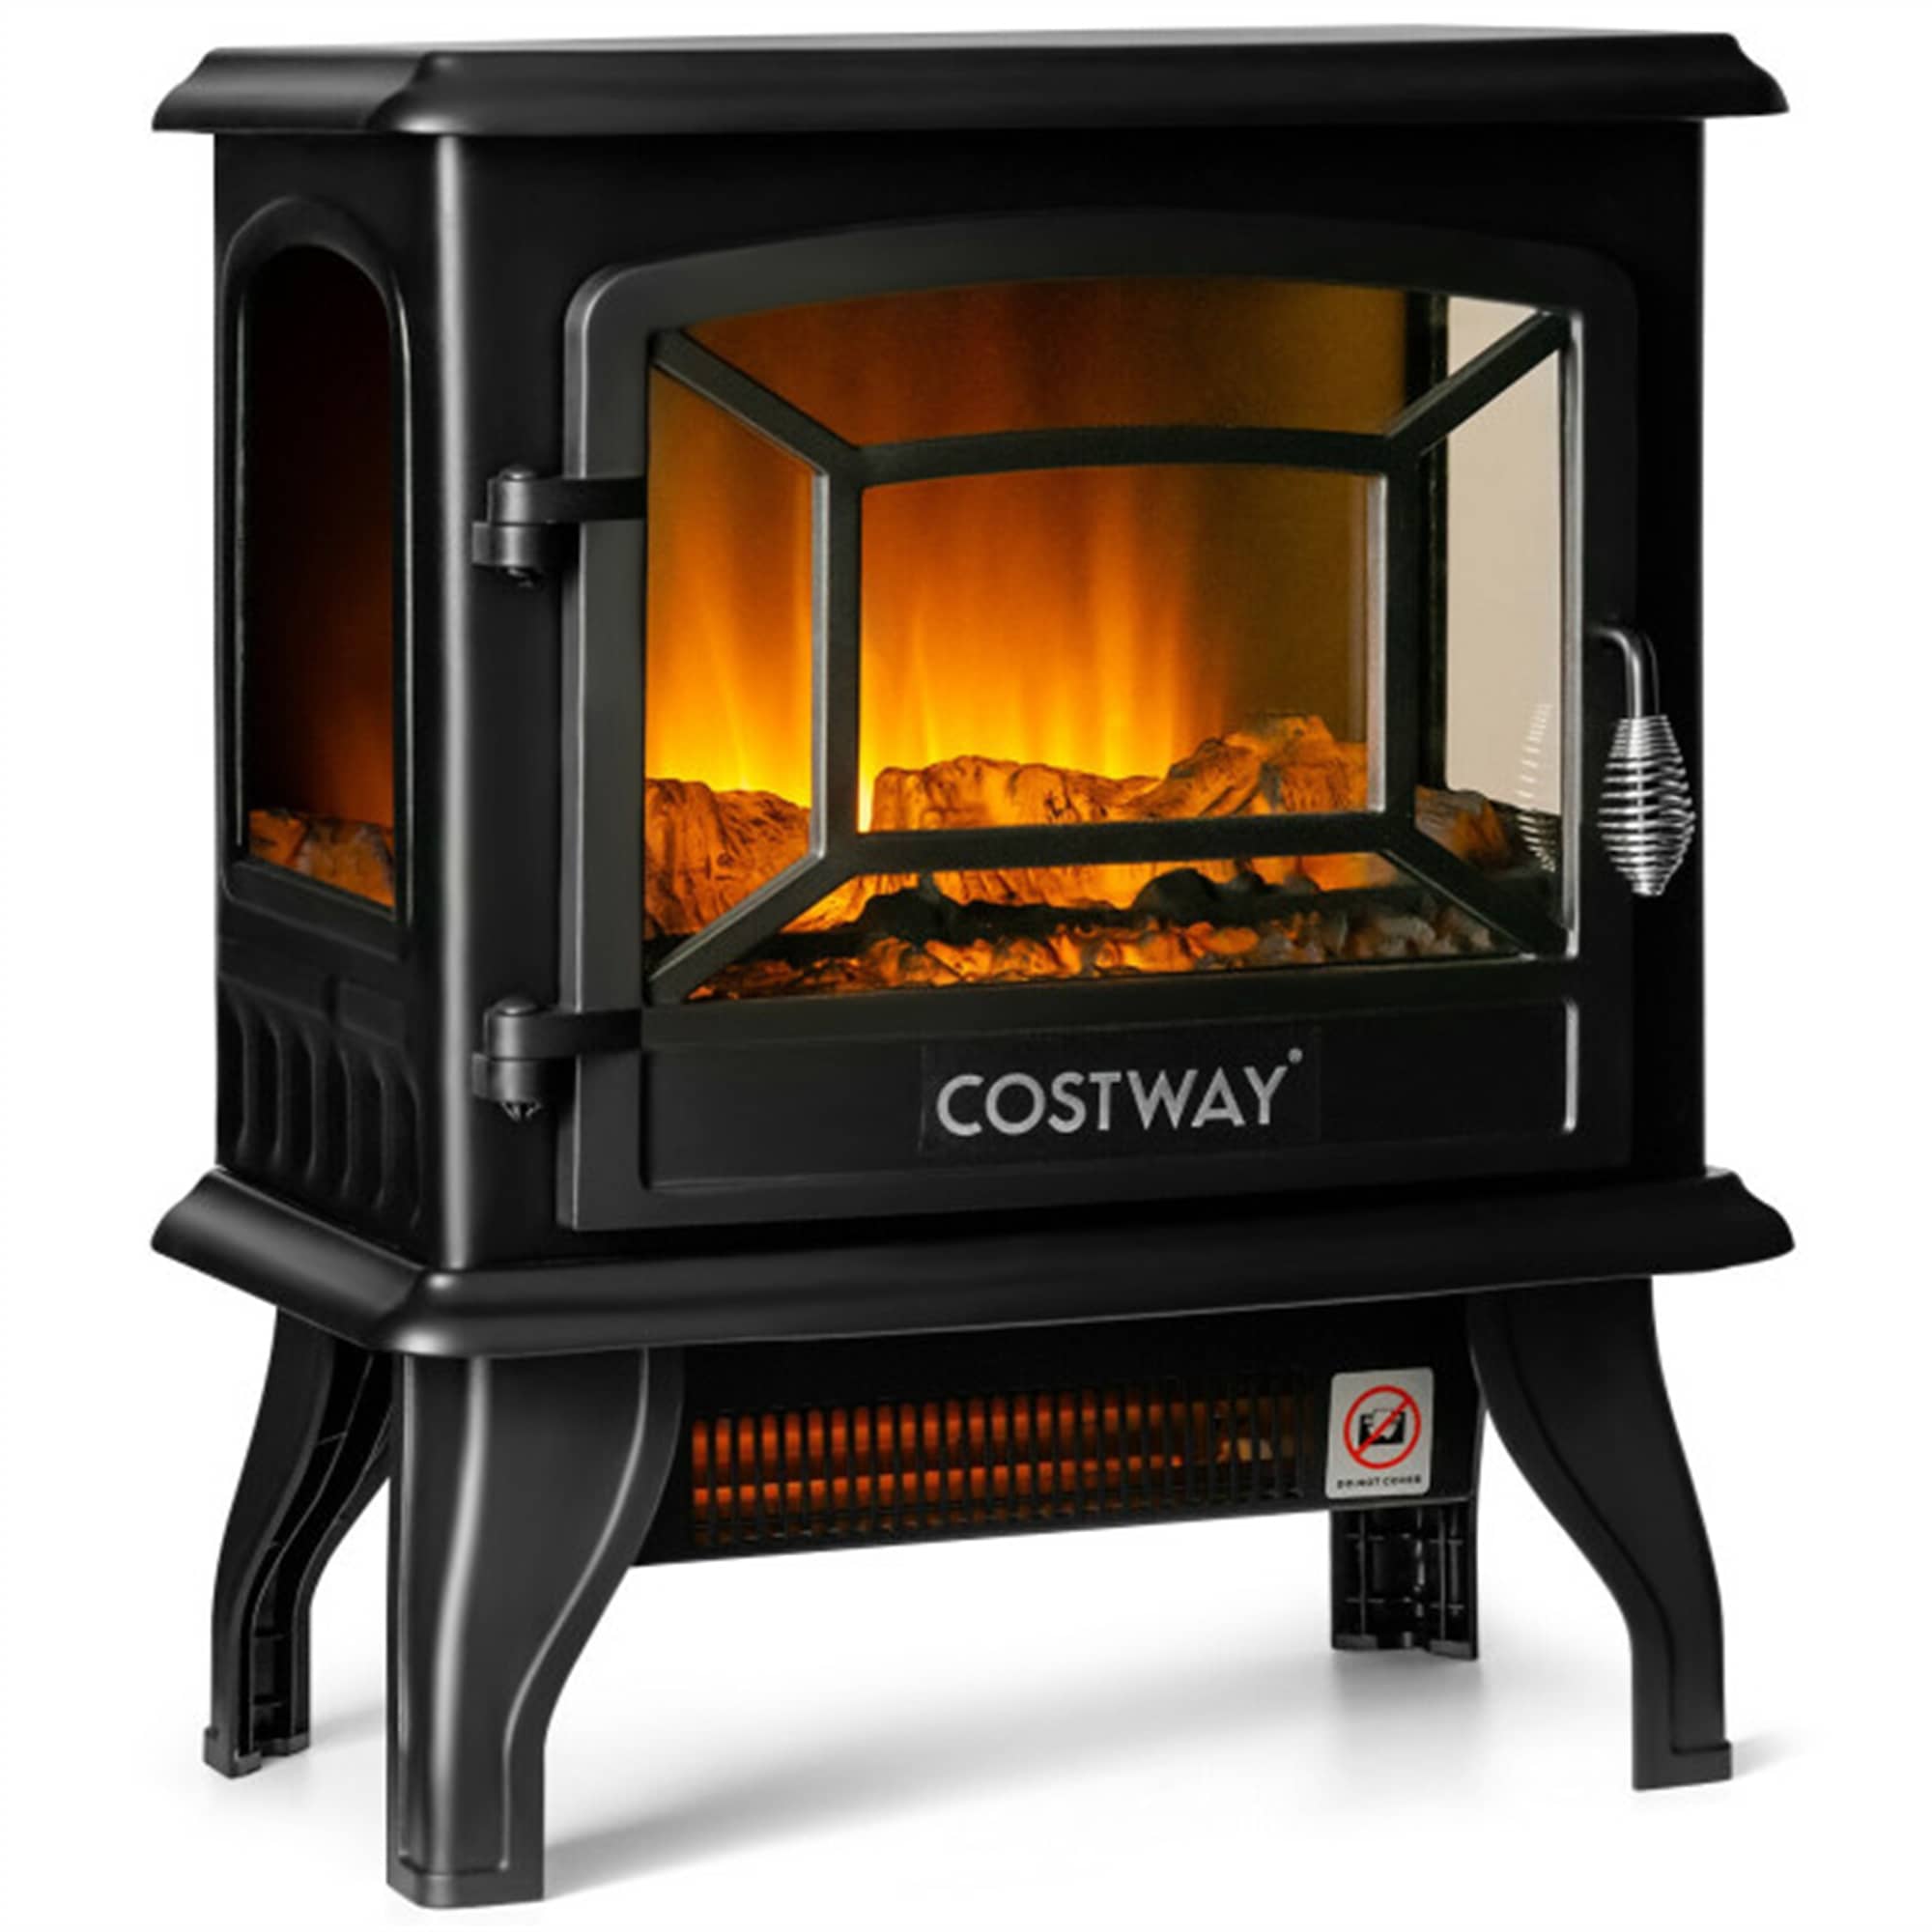 CASAINC 17 Inch Freestanding Electric Stove Fireplace Heater with 3 Side View